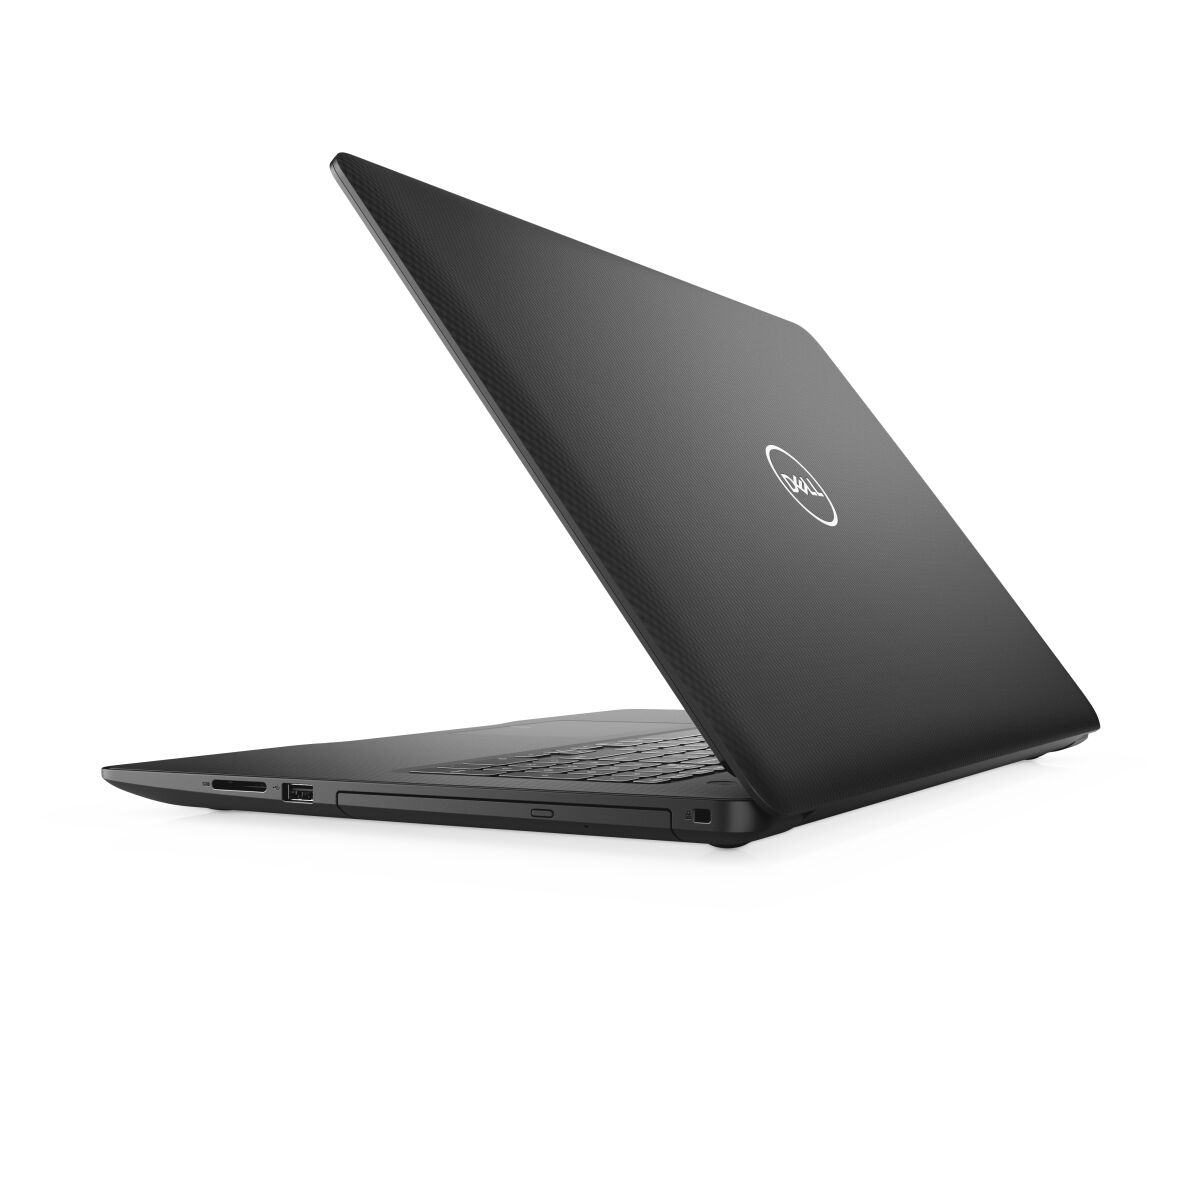 Dell Inspiron 3780 Bn37808 Laptop Specifications 6713